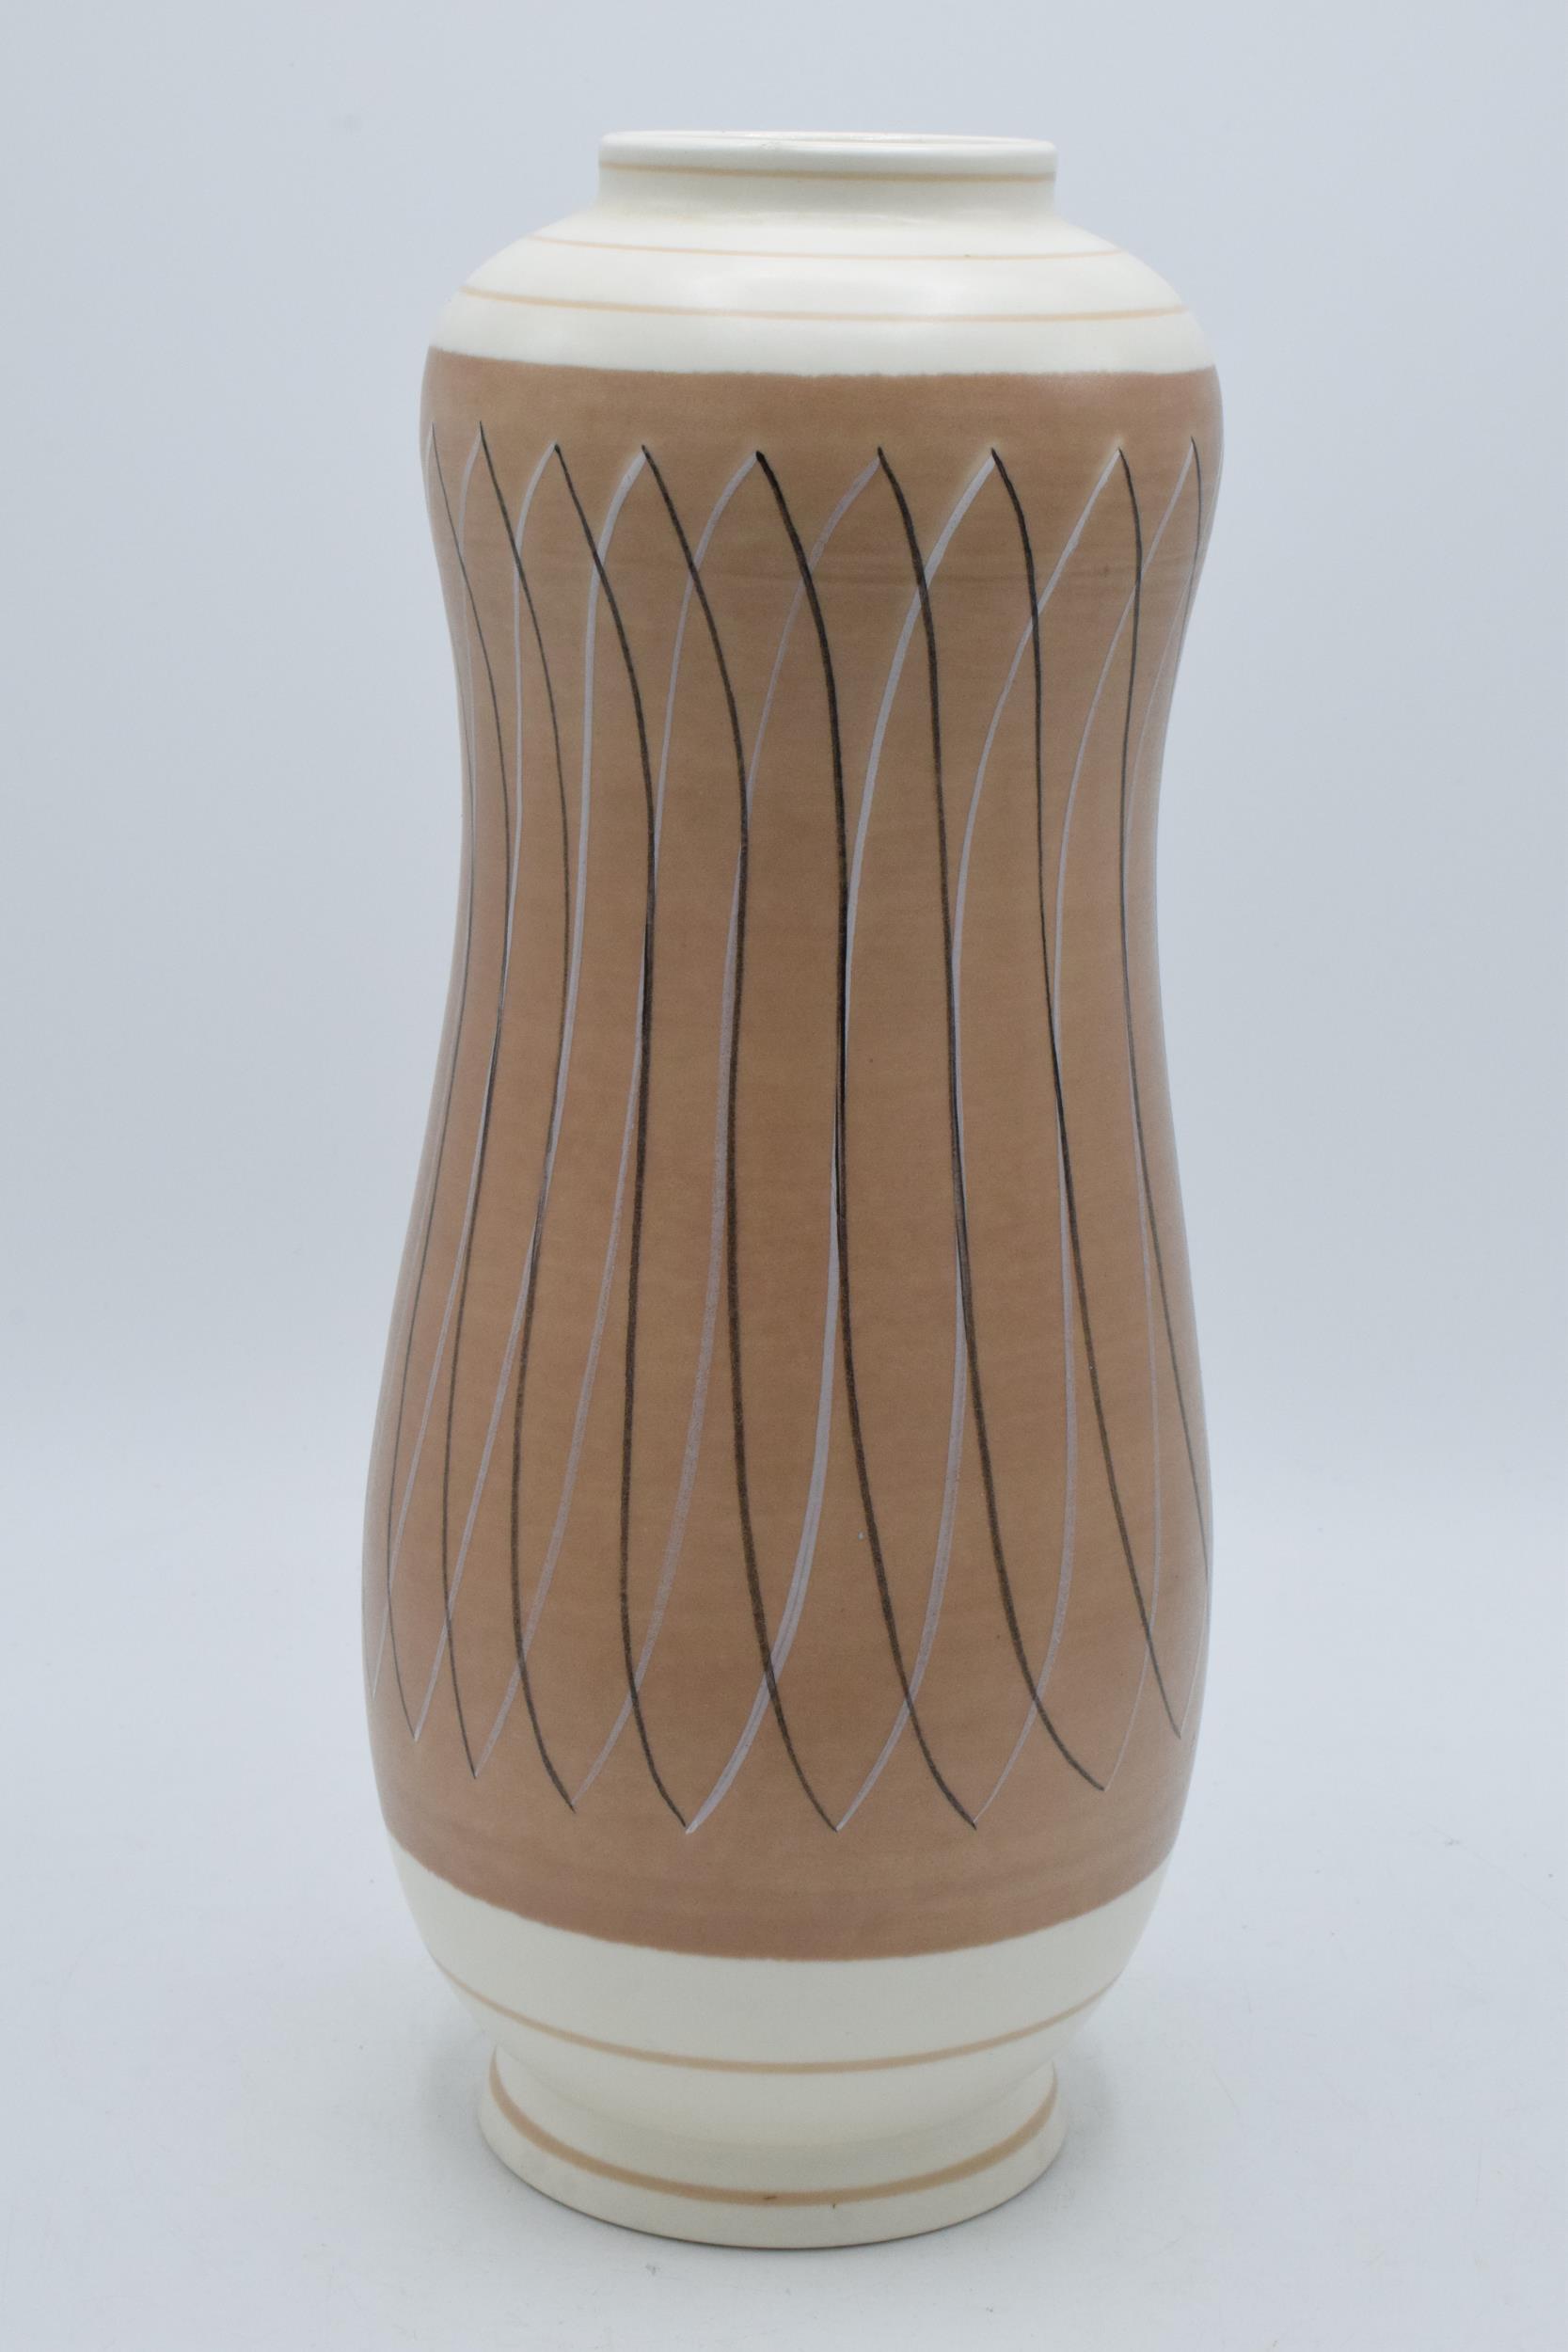 Poole Pottery Freeform peanut vase in the 'PRB' pattern shape 701, H 33cm In good condition with - Image 3 of 6